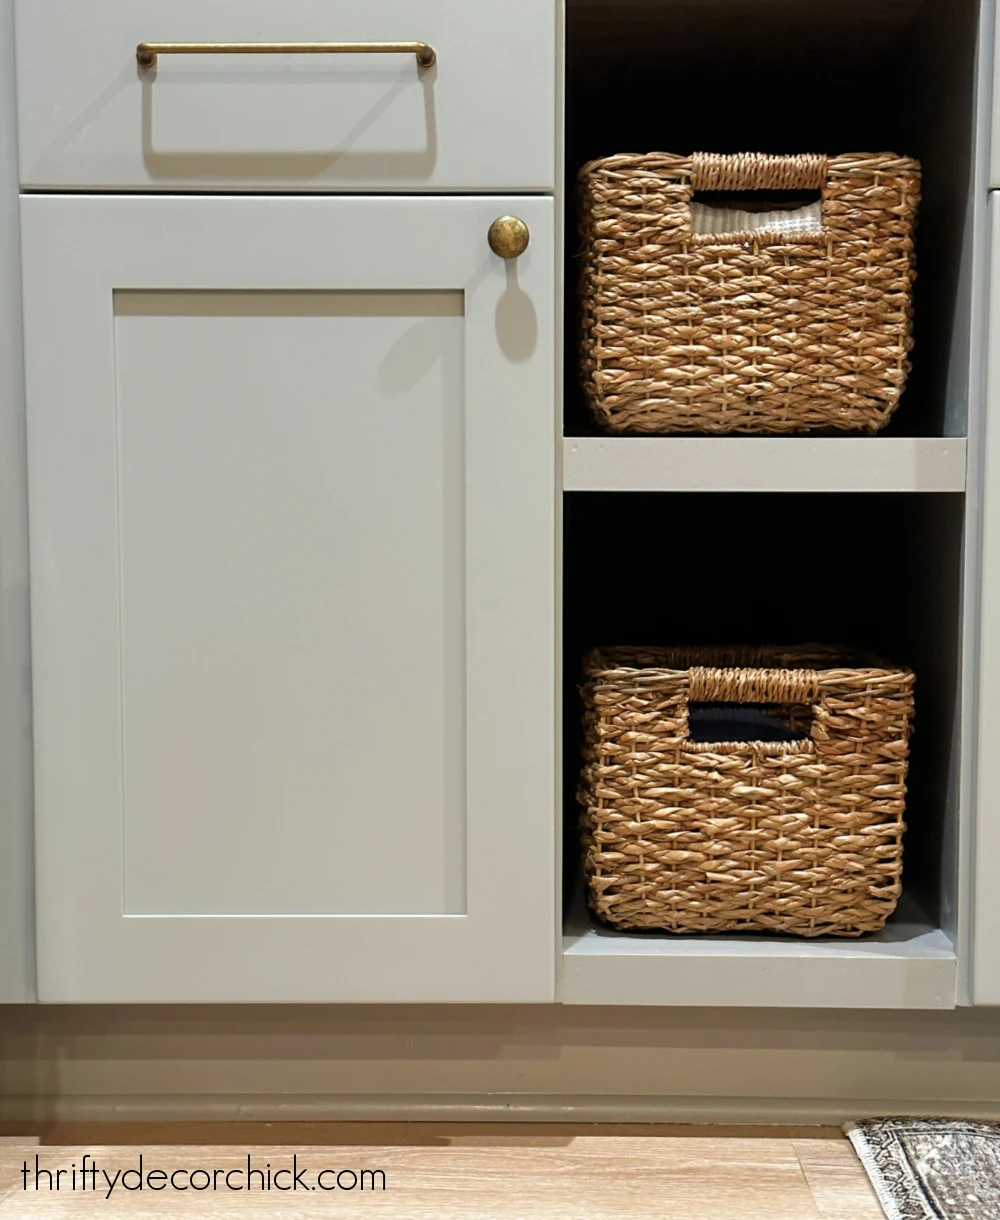 Comparing Cabinetry Options From Big Box Stores